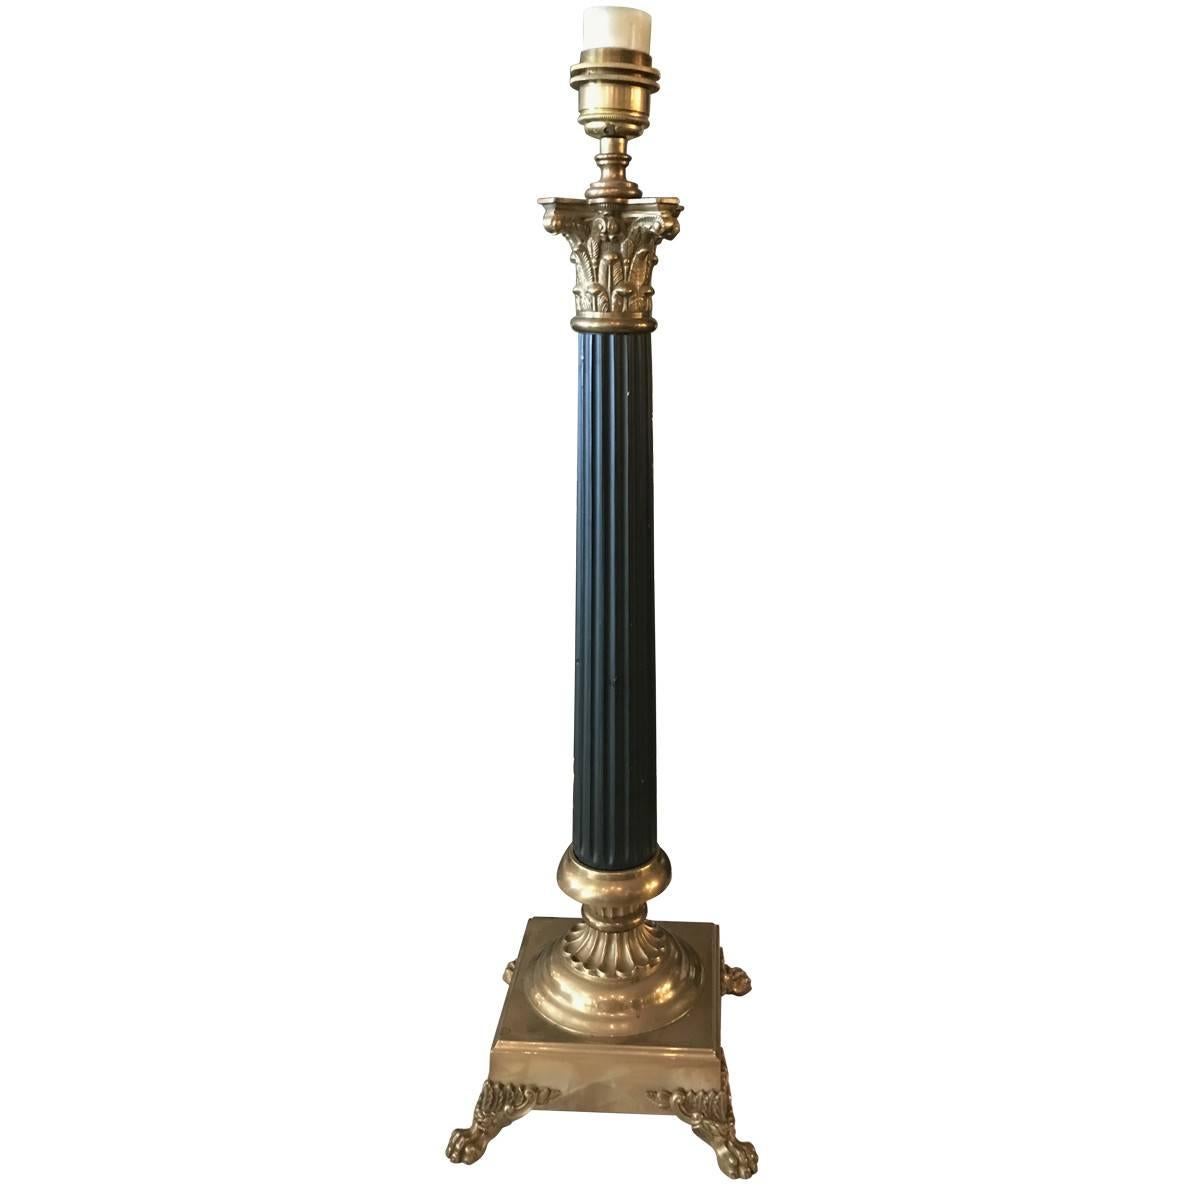 Pair of Empire-style table lamps hail from the private collection of American fashion designer Tommy Hilfiger. Both have fluted column posts with brass fittings and brass bases with claw feet. Ideal for a traditional living room décor. Sold in a set